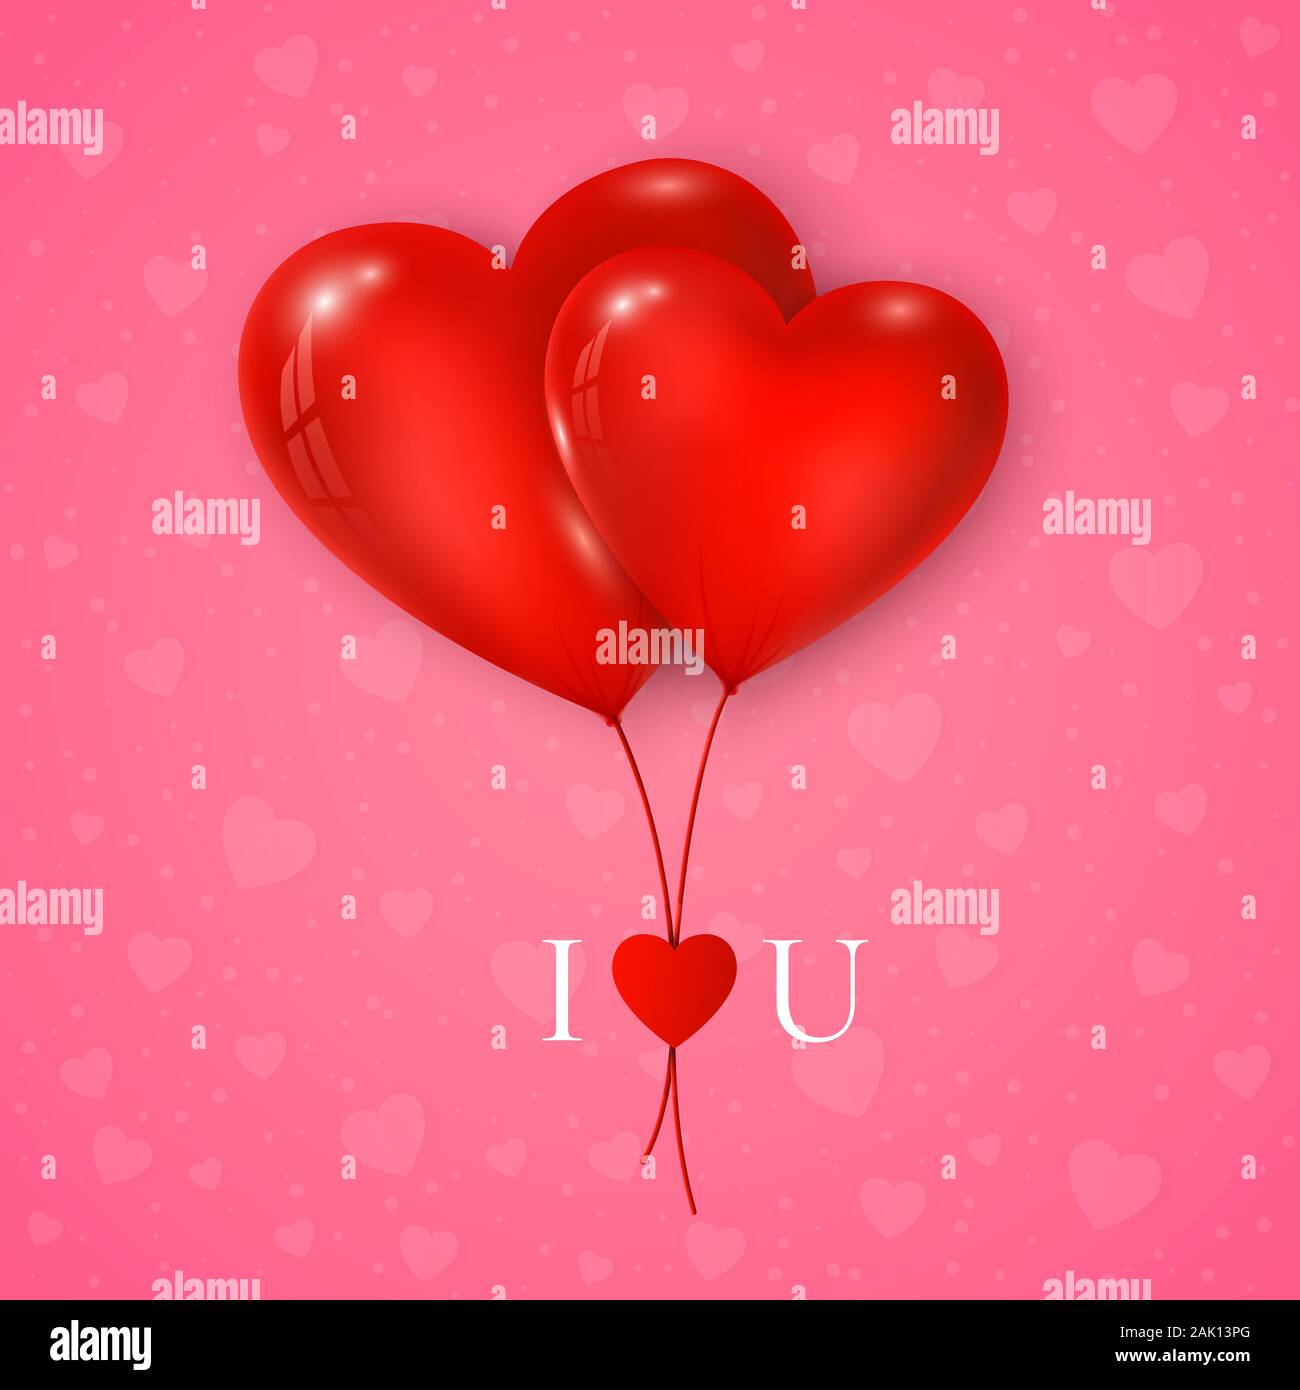 Couple of red hearts balloon with message I Love You. Valentines day greeting card on pink background. Vector Stock Vector